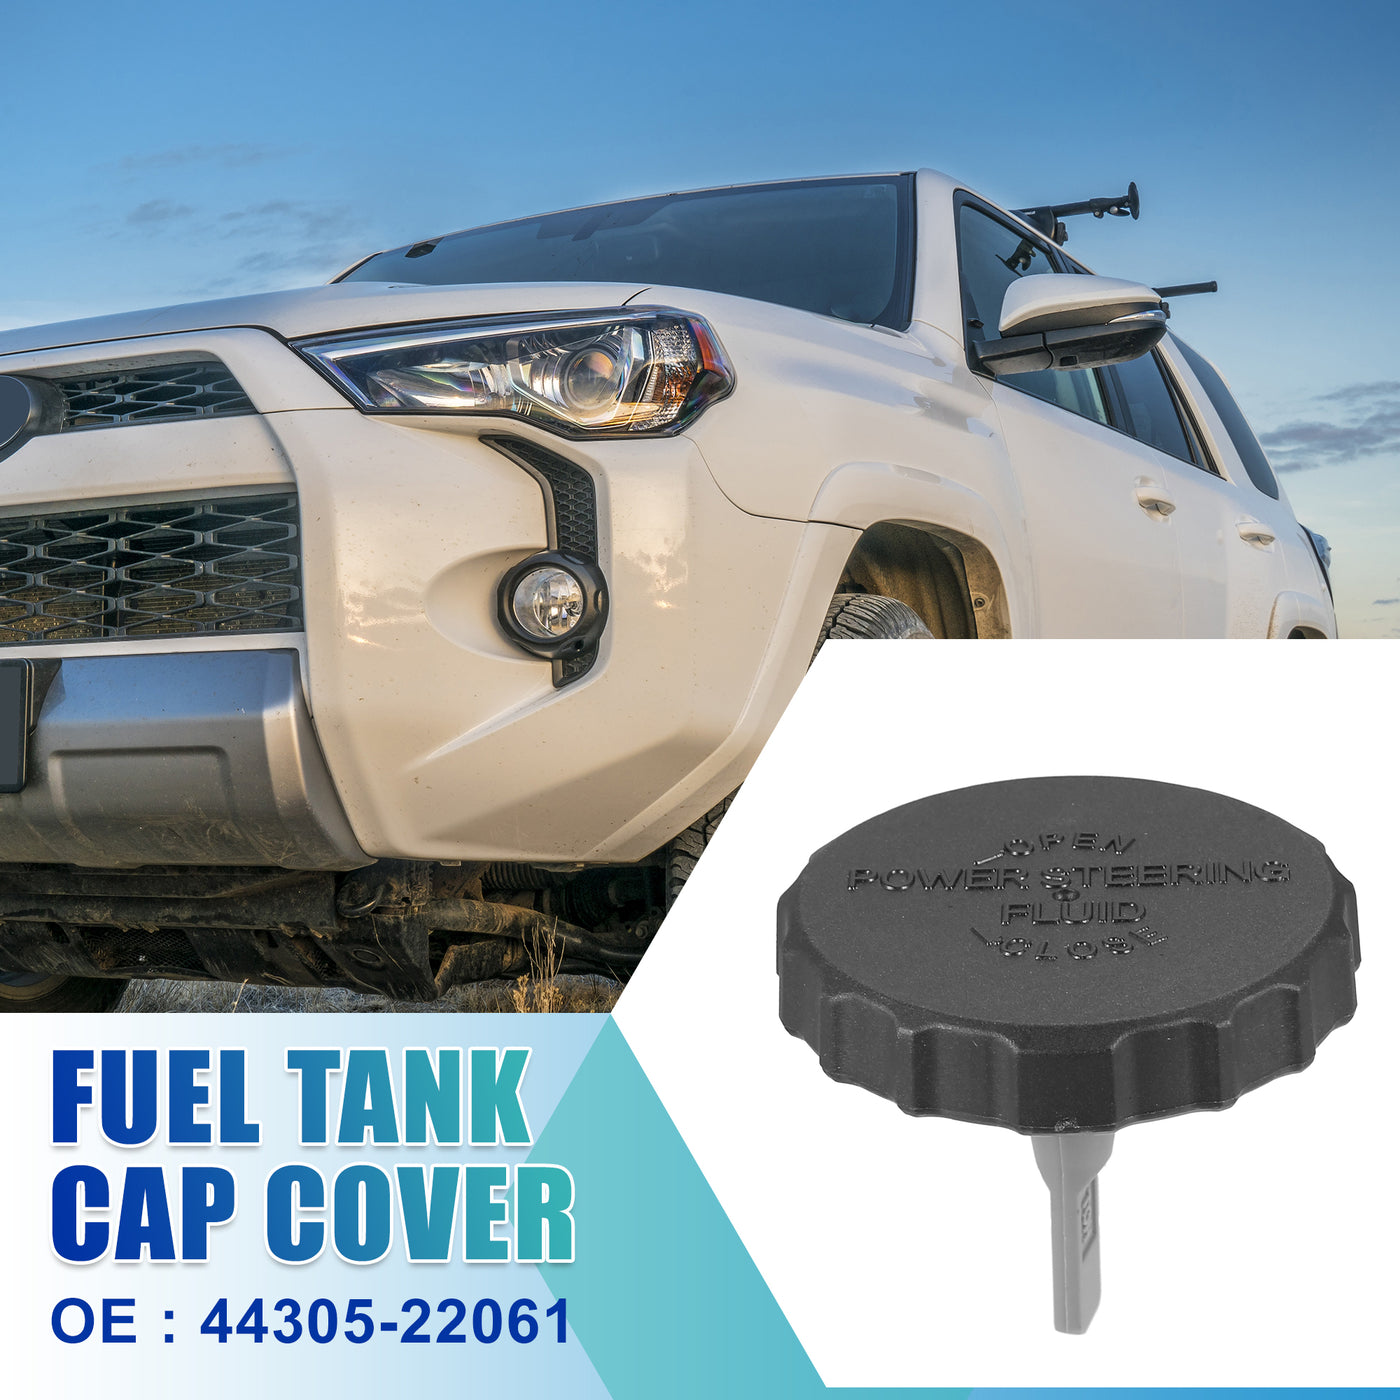 X AUTOHAUX Gas Cap 44305-22061 Power Steering Fuel Petrol Tank Cap Cover for Toyota Camry 1992-2001 Sienna 1998-2003 Corolla 1998-2002 Avalon 1995-2003